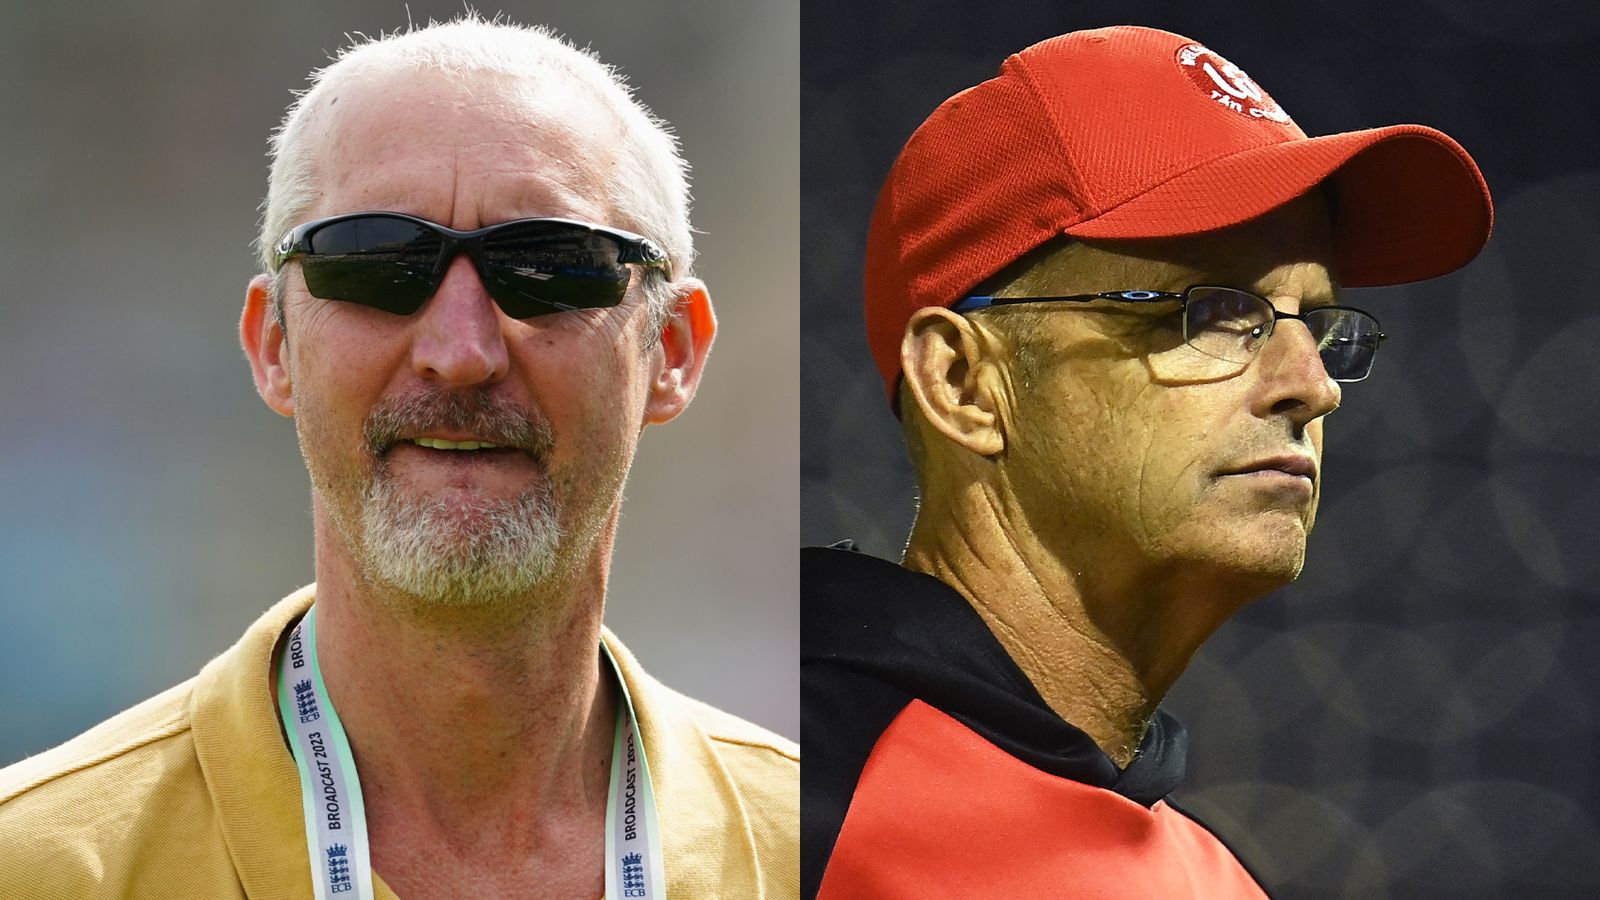 Gary Kirsten appointed head coach of Pakistan mens cricket team for limited overs formats and Jason Gillespie for Tests after months of turmoil at PCB